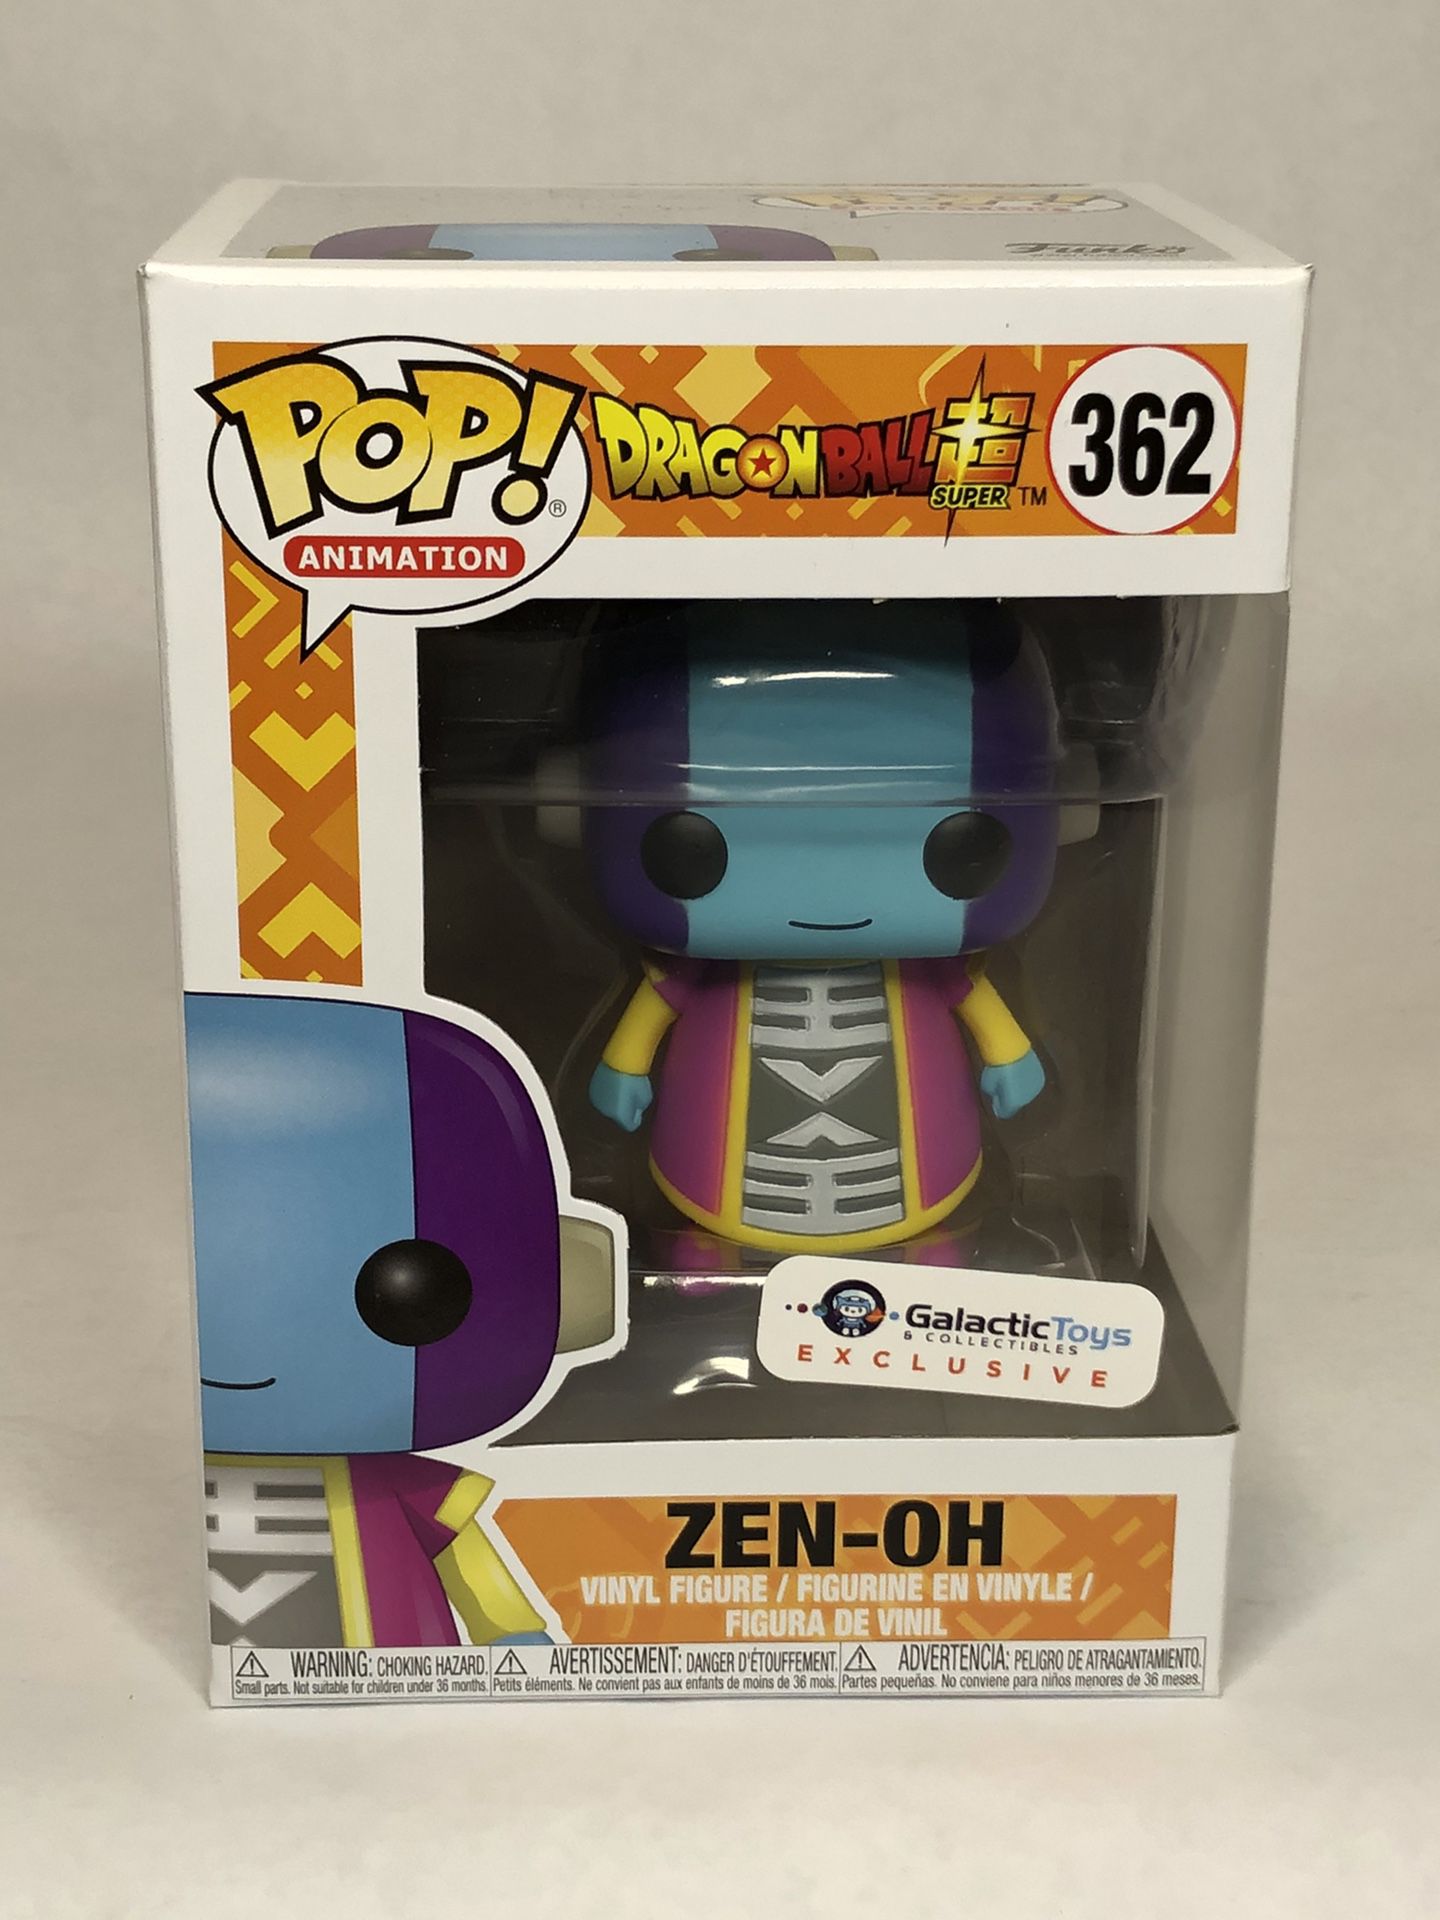 MINT Zen-Oh Galactic Toys Exclusive Funko Pop Animation #362 Dragon Ball Z